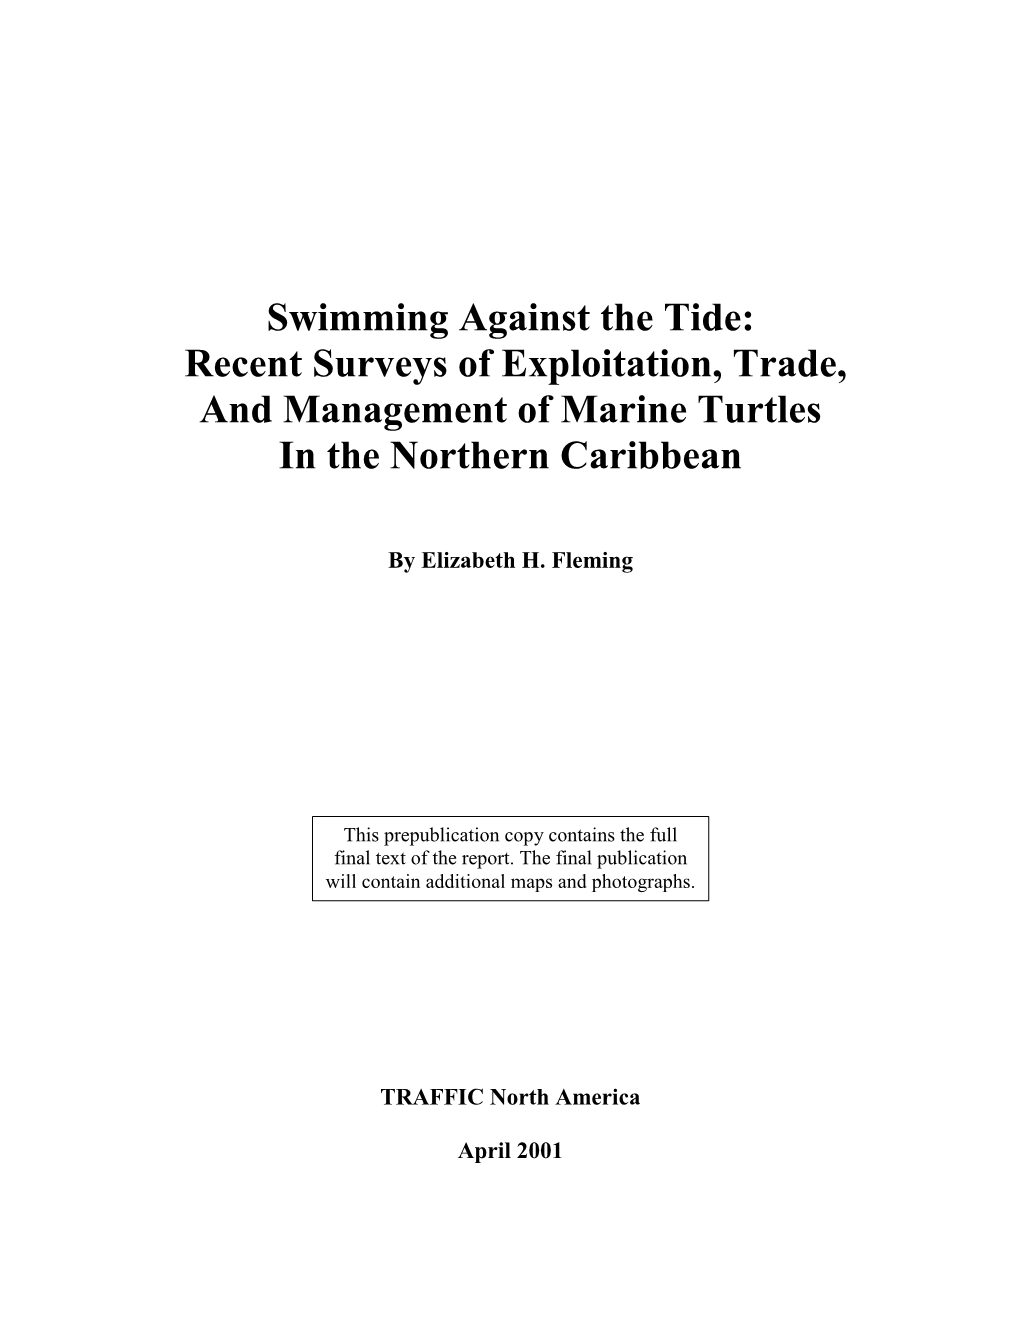 Swimming Against the Tide: Recent Surveys of Exploitation, Trade, and Management of Marine Turtles in the Northern Caribbean